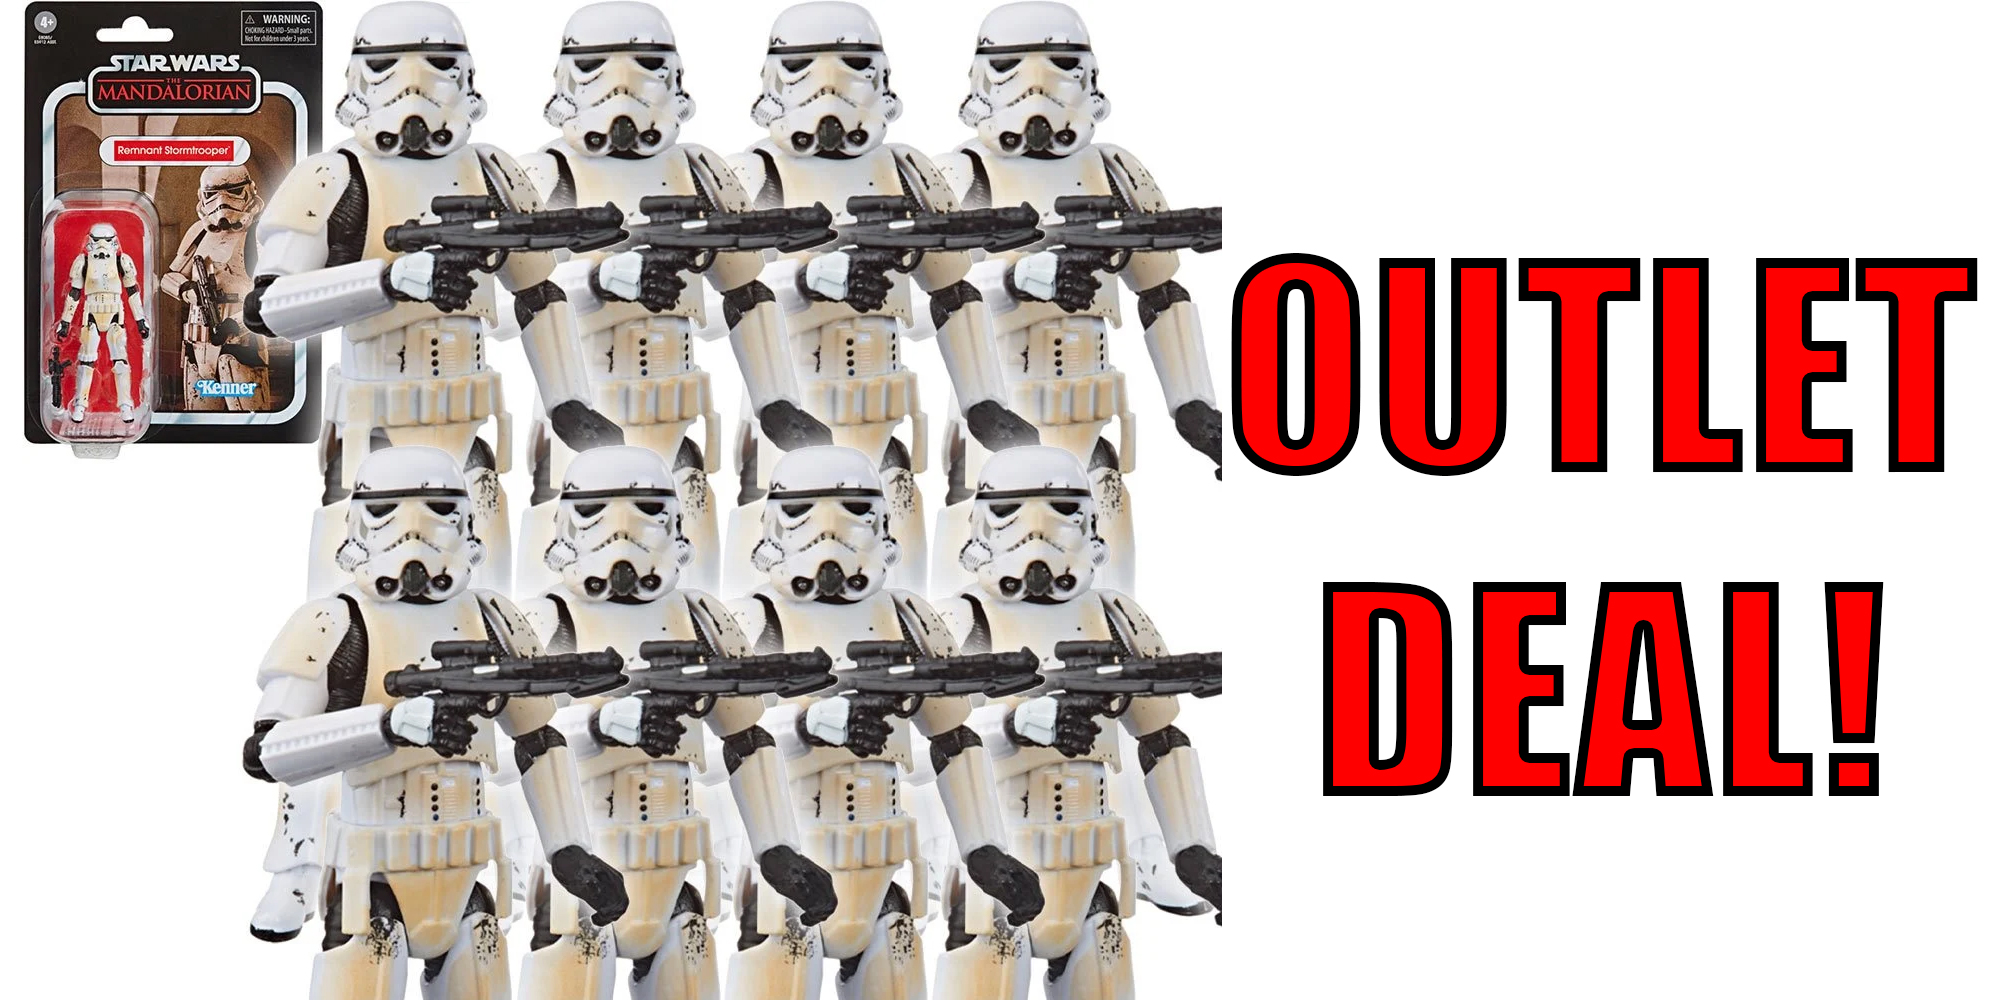 Stormtrooper Outlet Deal @ Entertainment Earth - Check It Out!